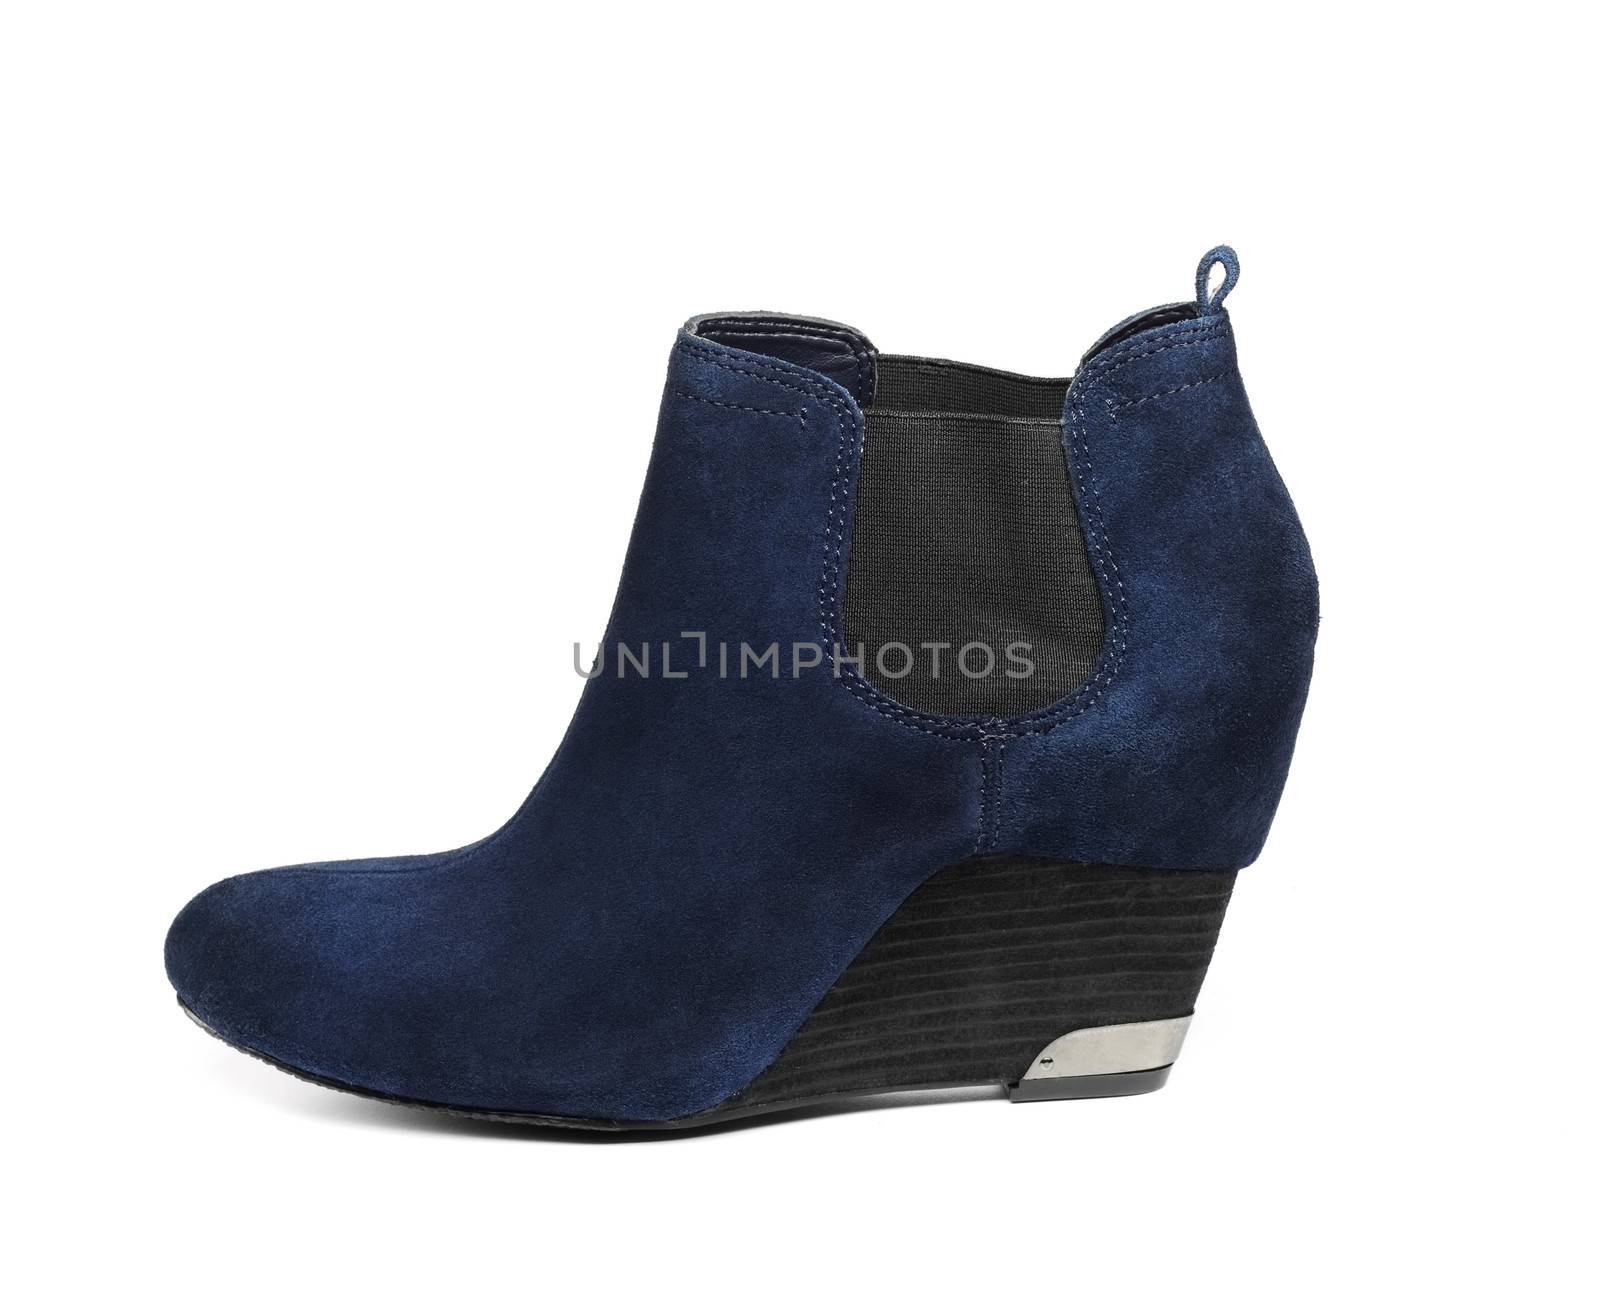 Blue suede woman's boots over white background